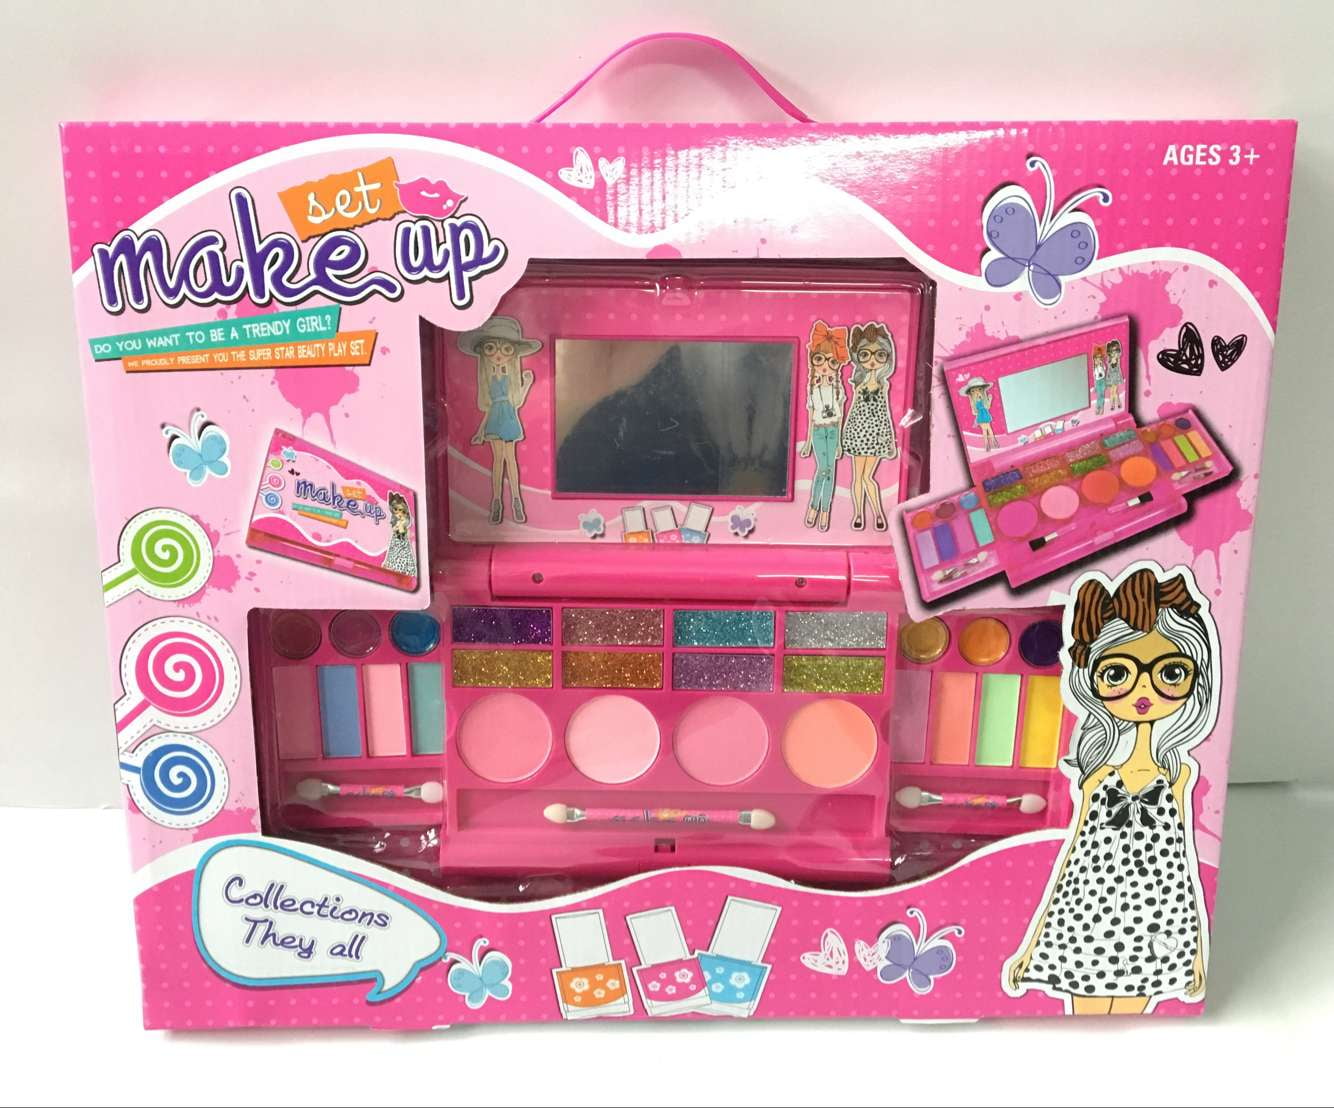 Tomons Kids Washable Makeup Kit, Fold Out Makeup Palette with Mirror, Make Up Toy Cosmetic Kit Gifts for Girls - Safety Tested- Non Toxic